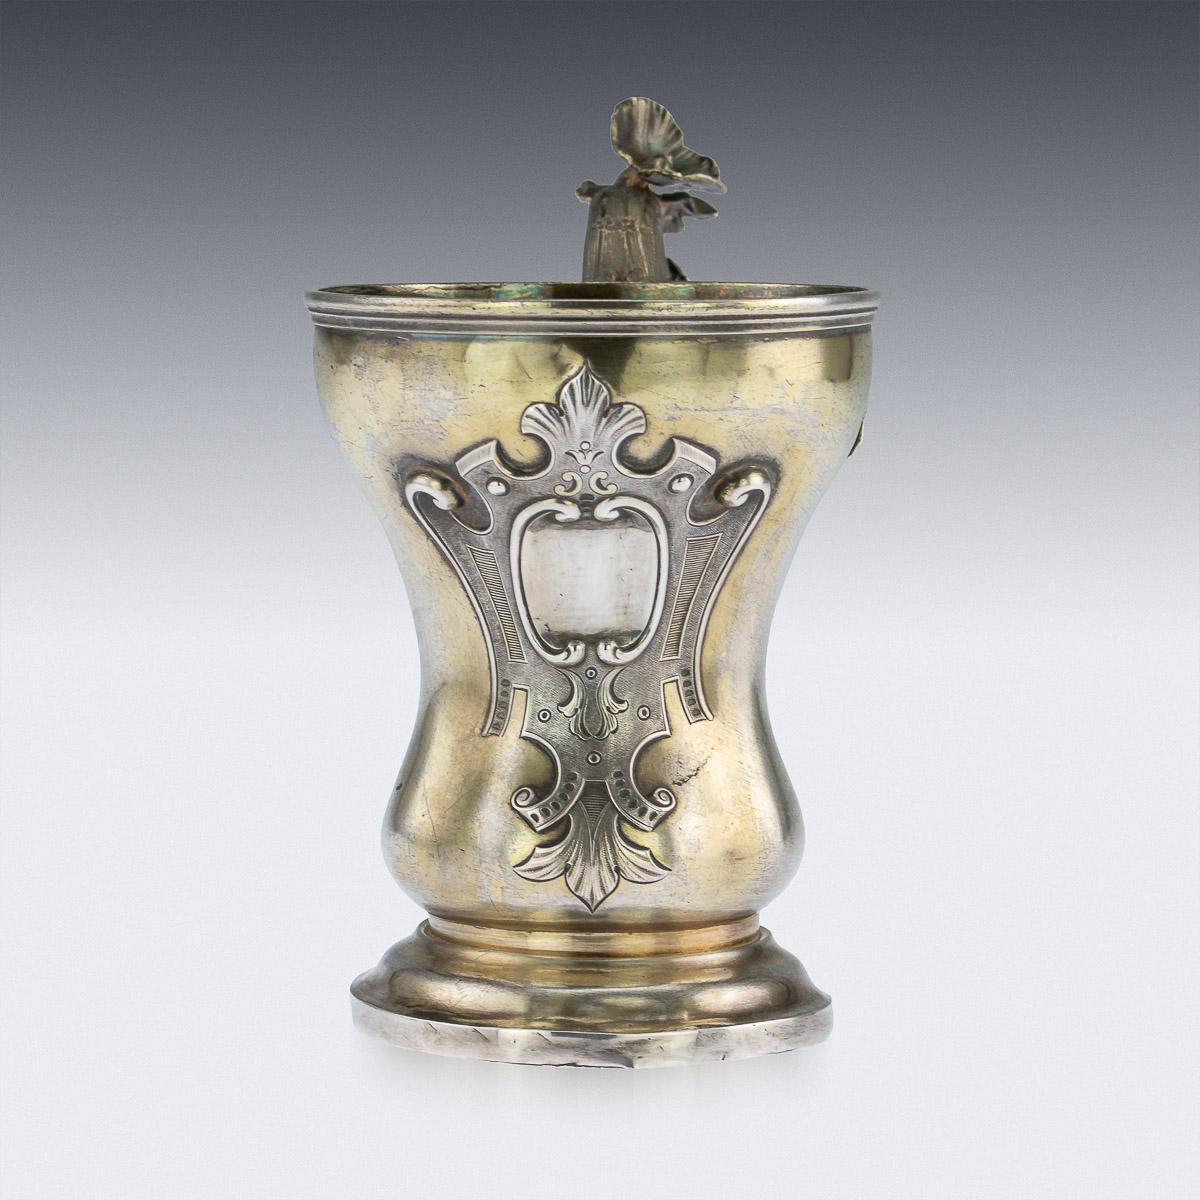 19th Century Russian Empire Solid Silver-Gilt Cup, St-Petersburg, circa 1849 1